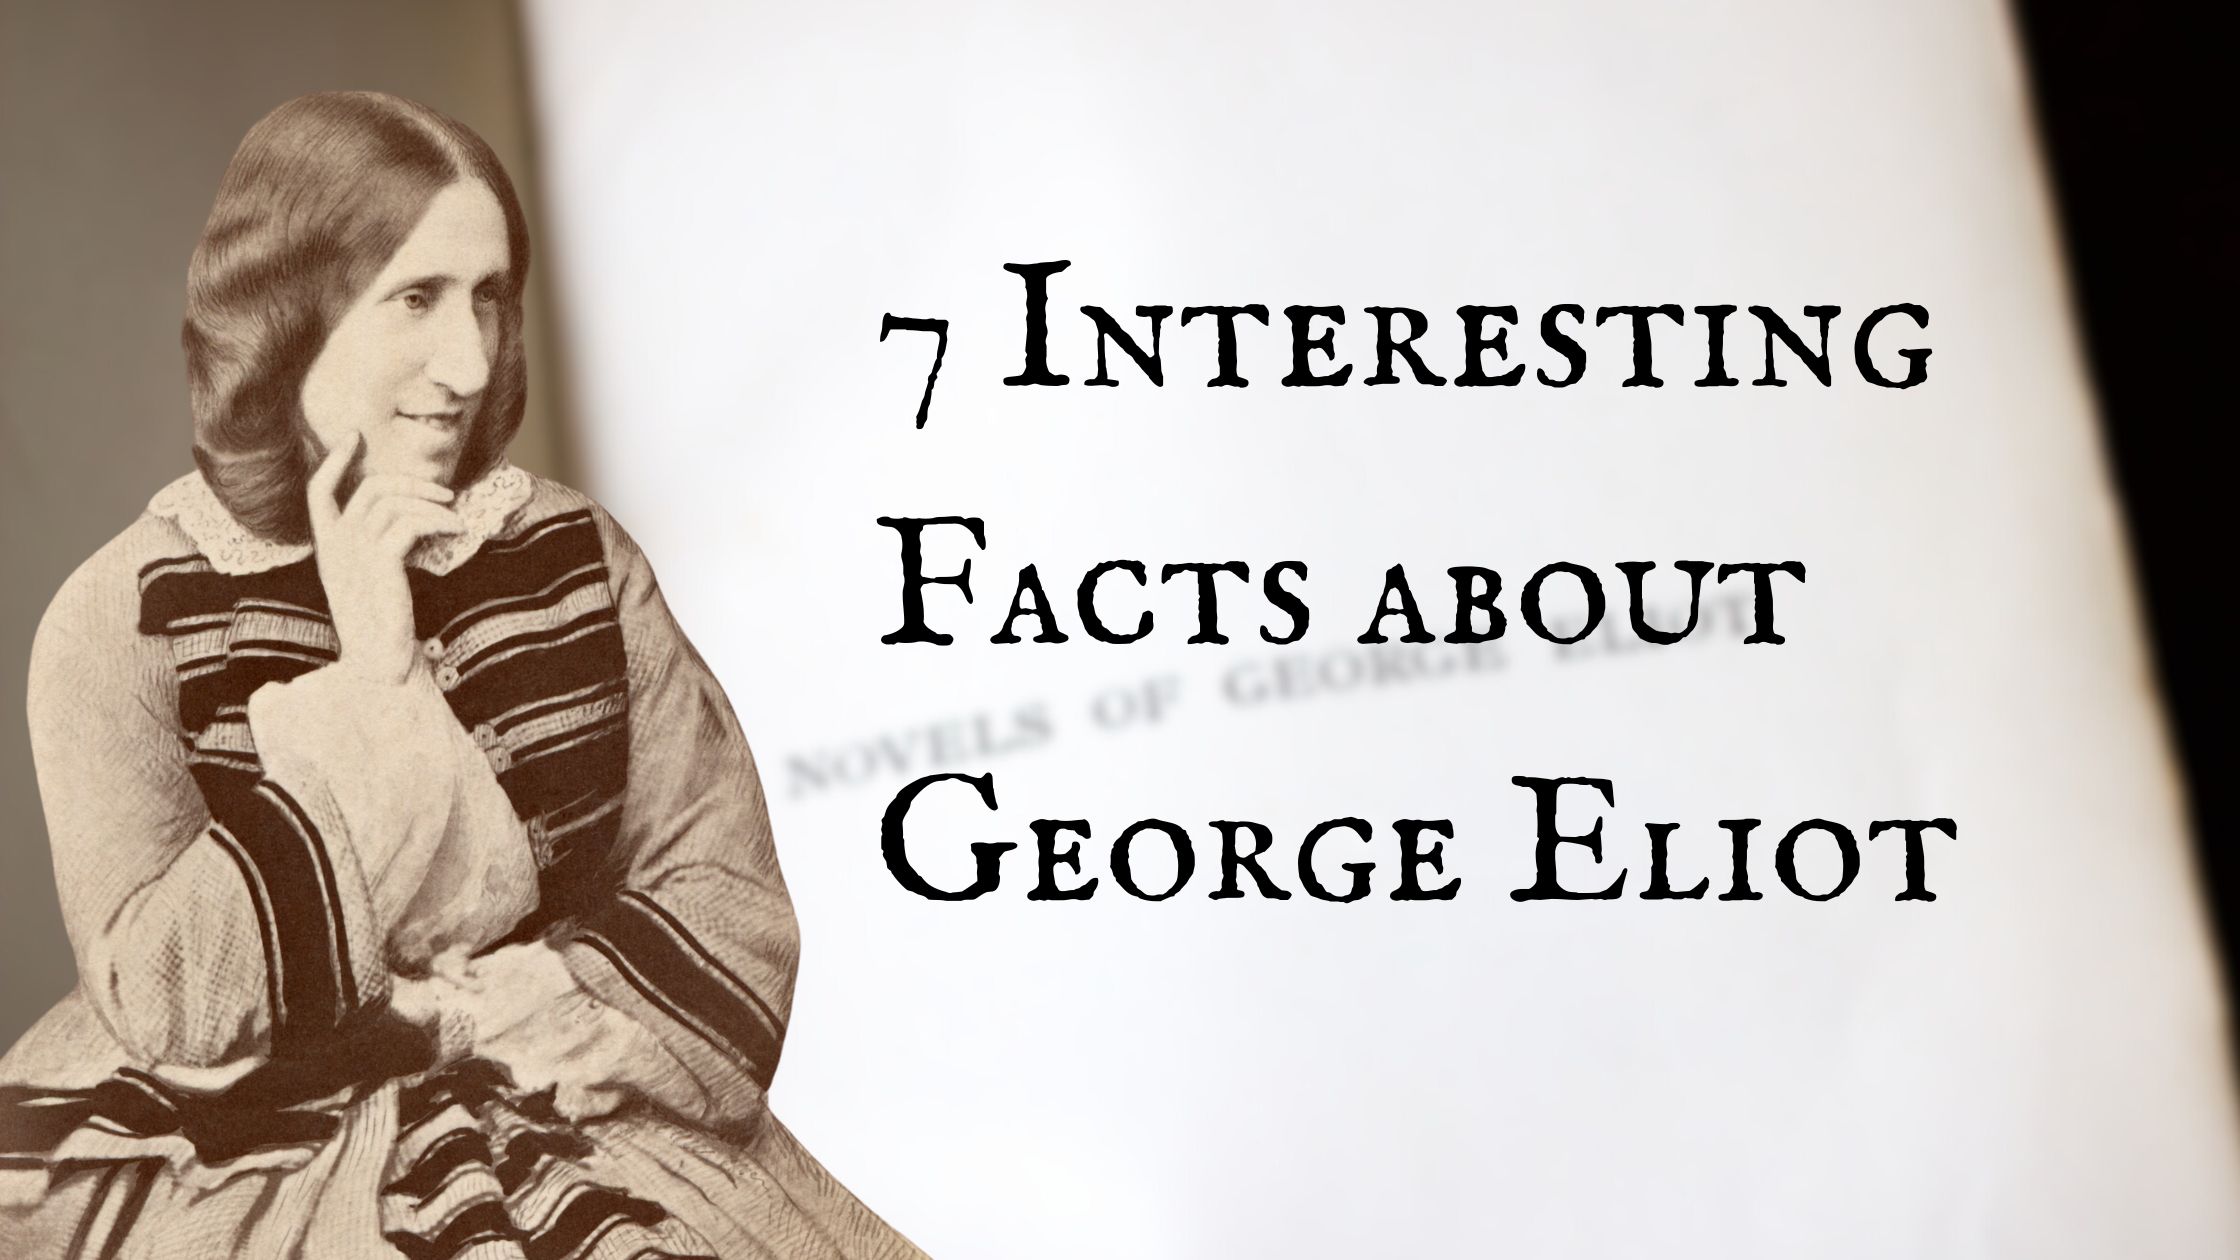 7 Interesting Facts about George Eliot